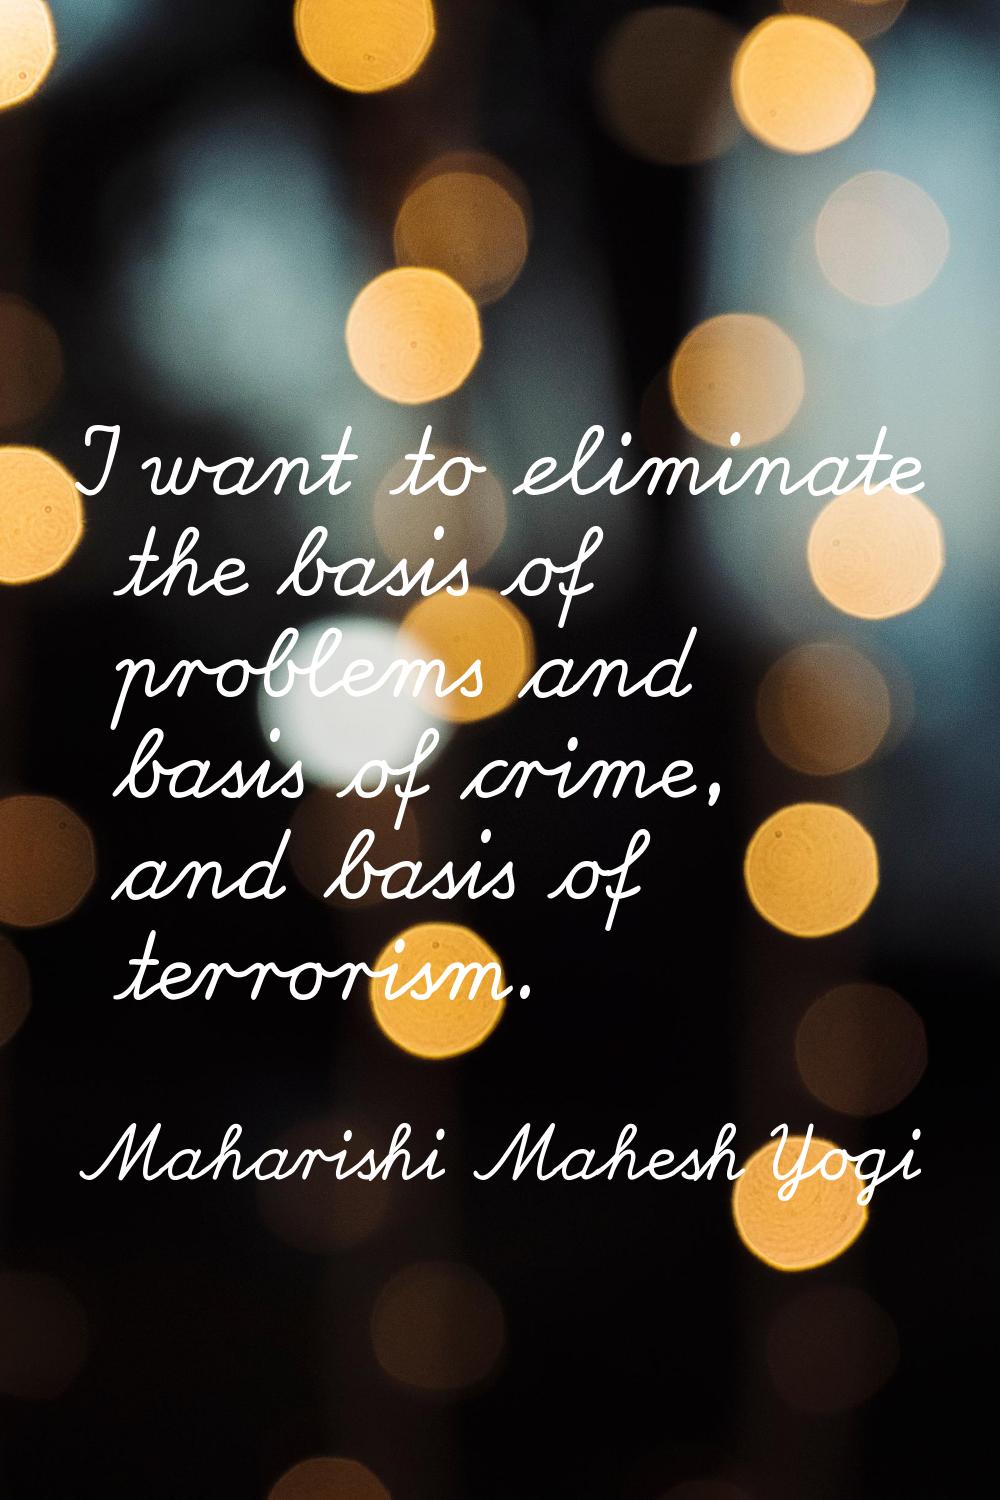 I want to eliminate the basis of problems and basis of crime, and basis of terrorism.